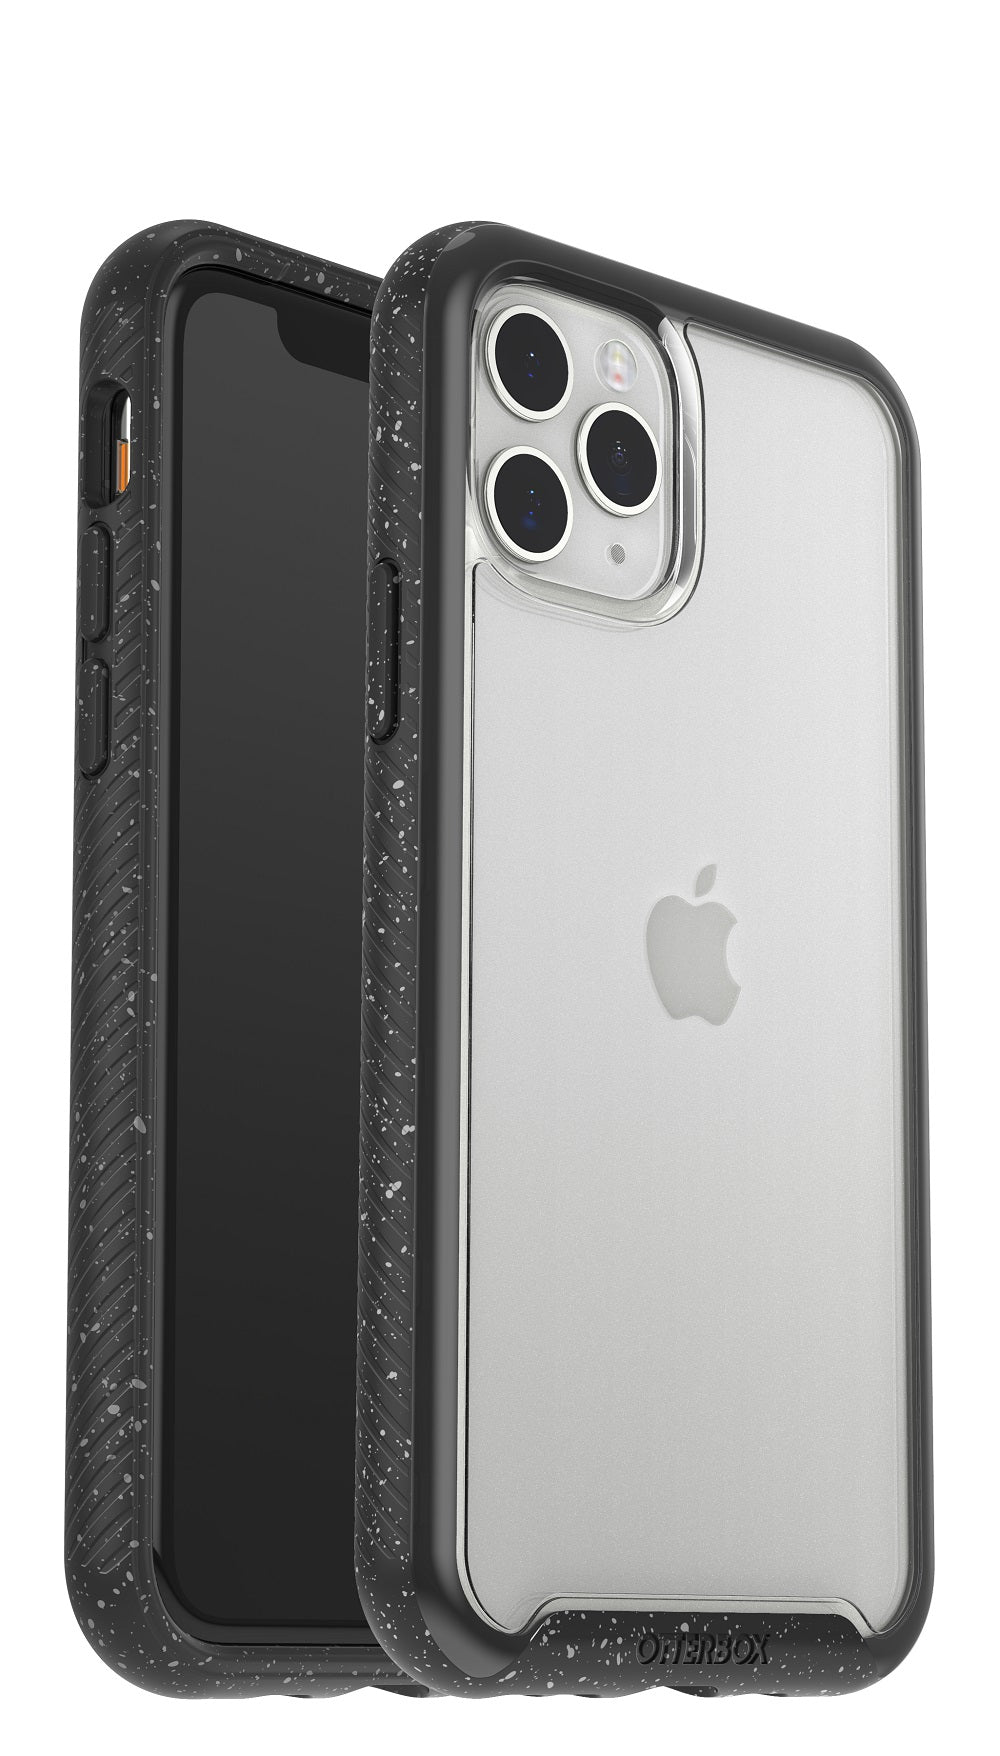 OtterBox Ultra Slim Clear Designer Case for Apple iPhone 11 Pro - Dash (New)